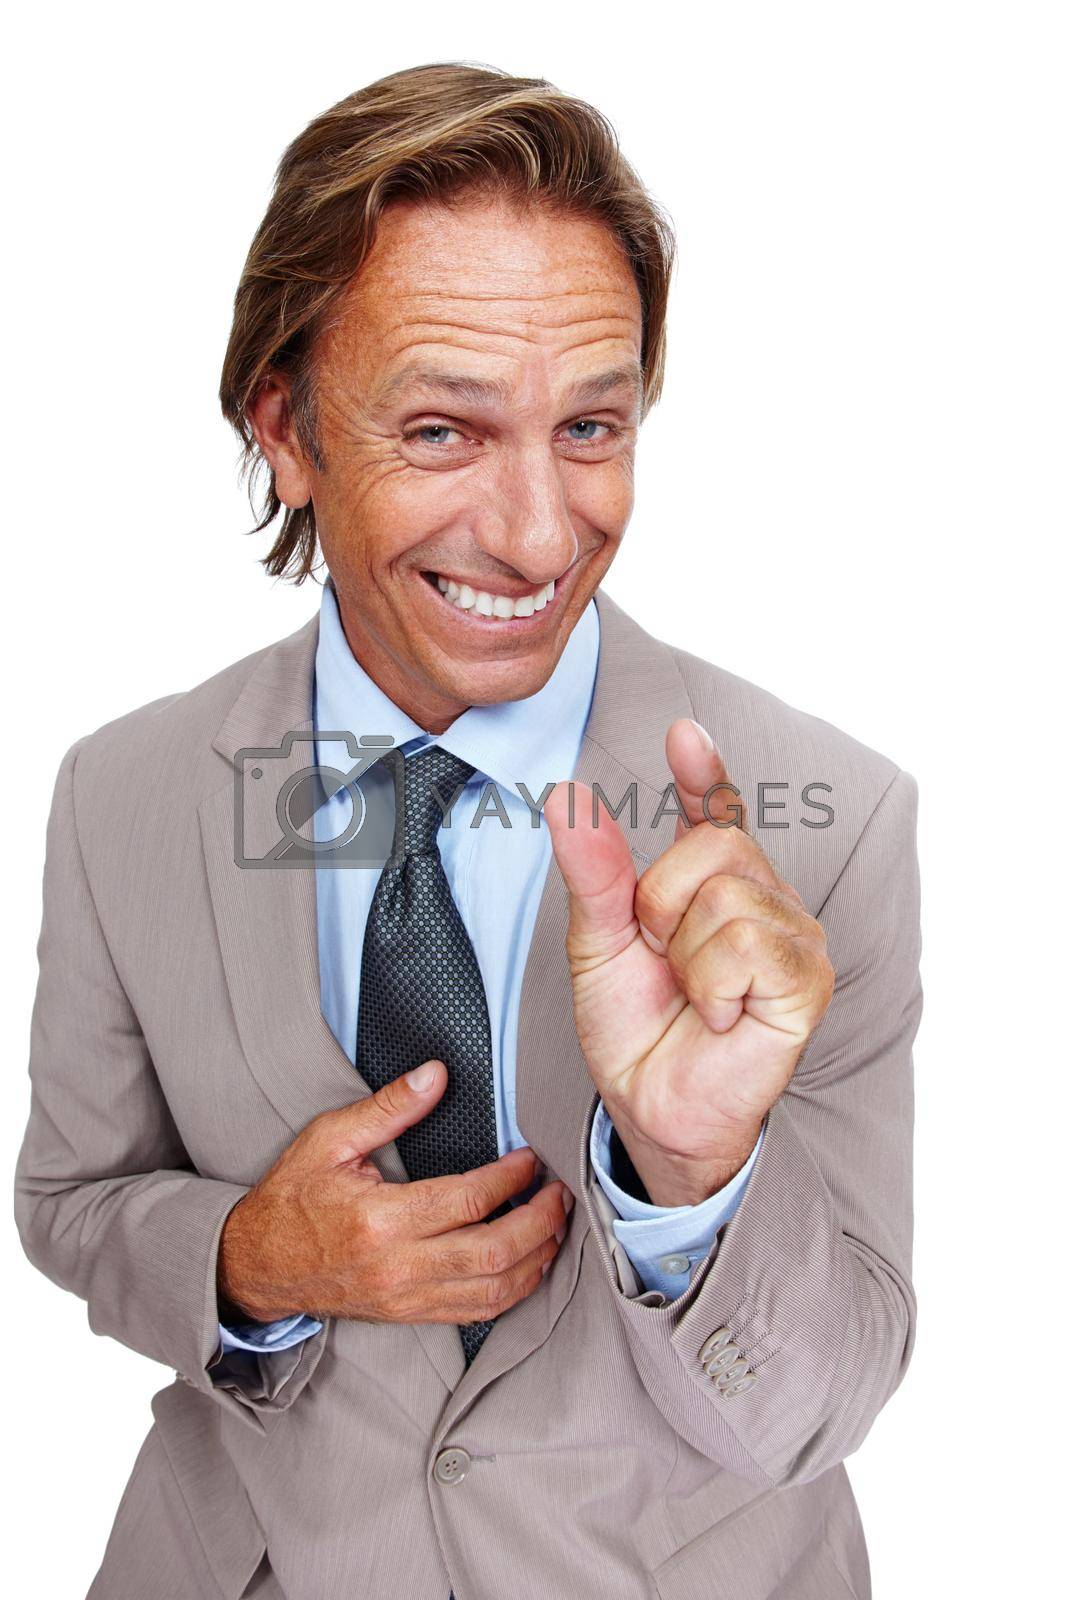 Royalty free image of Just kidding. An isolated portrait of a businessman humourously indicating size with his hand. by YuriArcurs